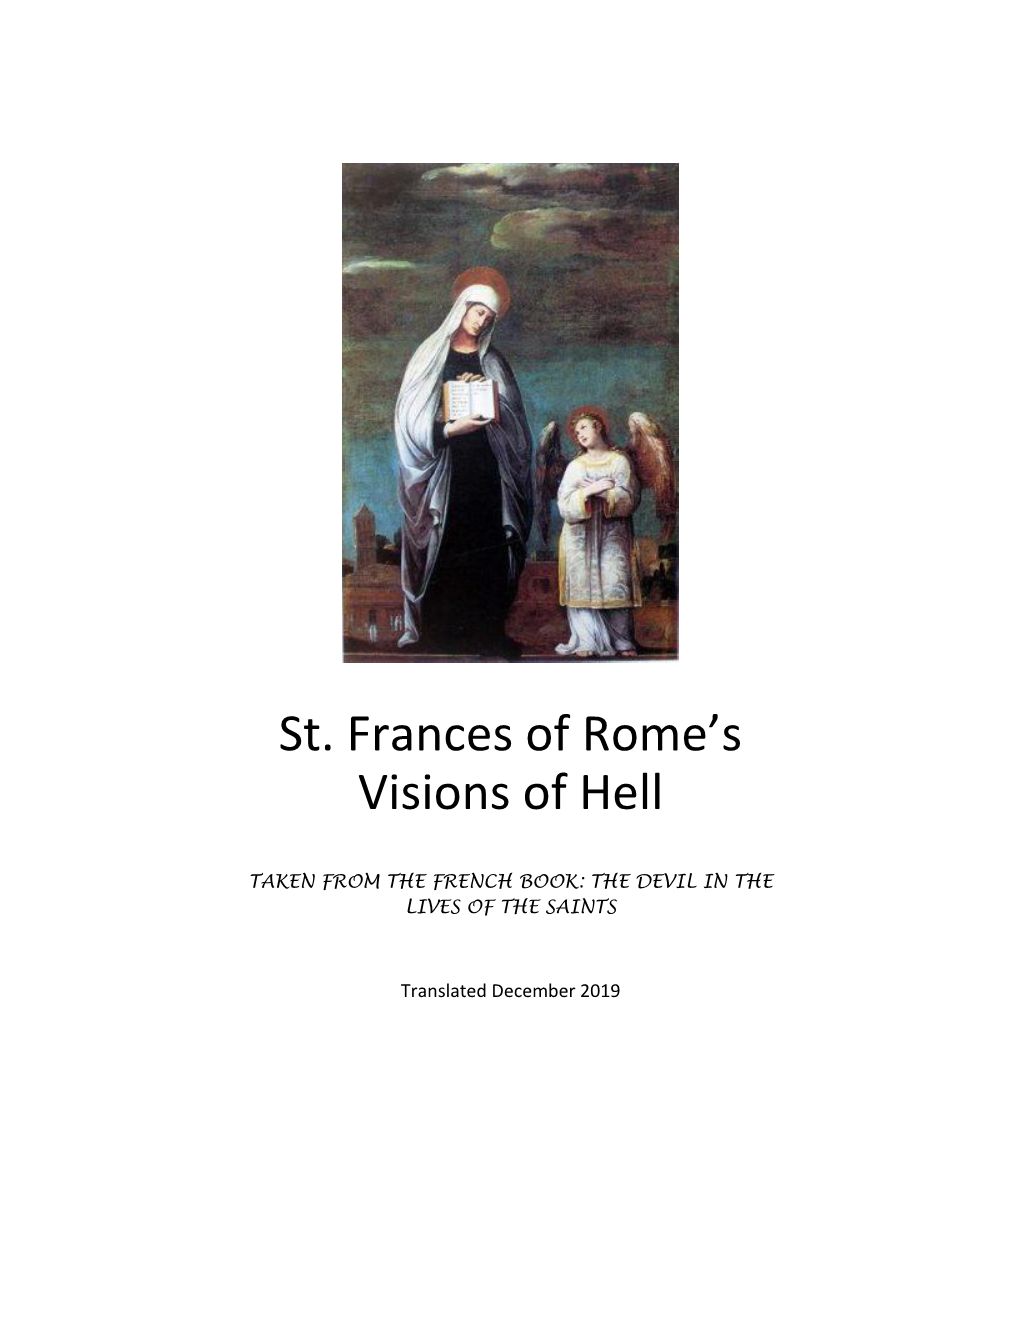 St. Frances of Rome's Visions of Hell